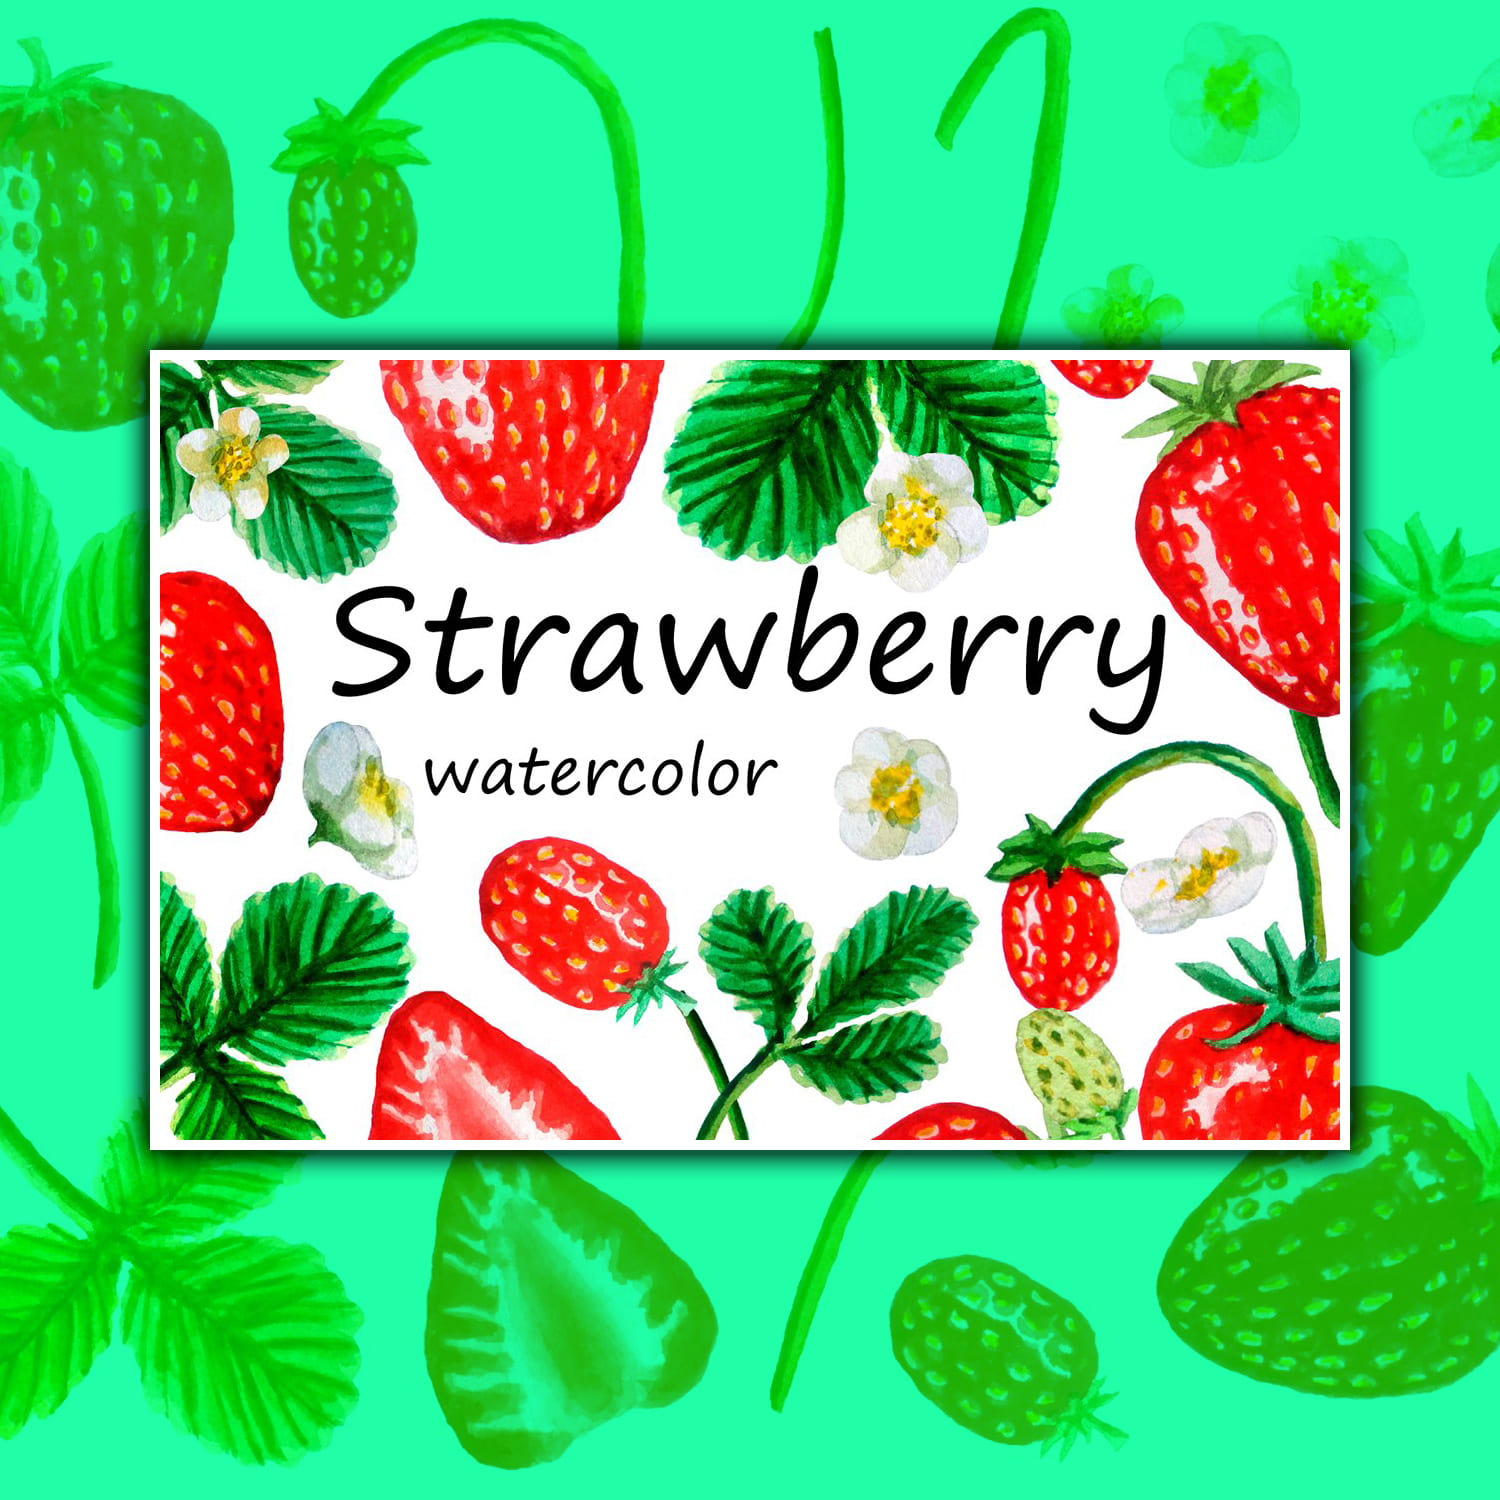 A slide of watercolor strawberries on a green background.